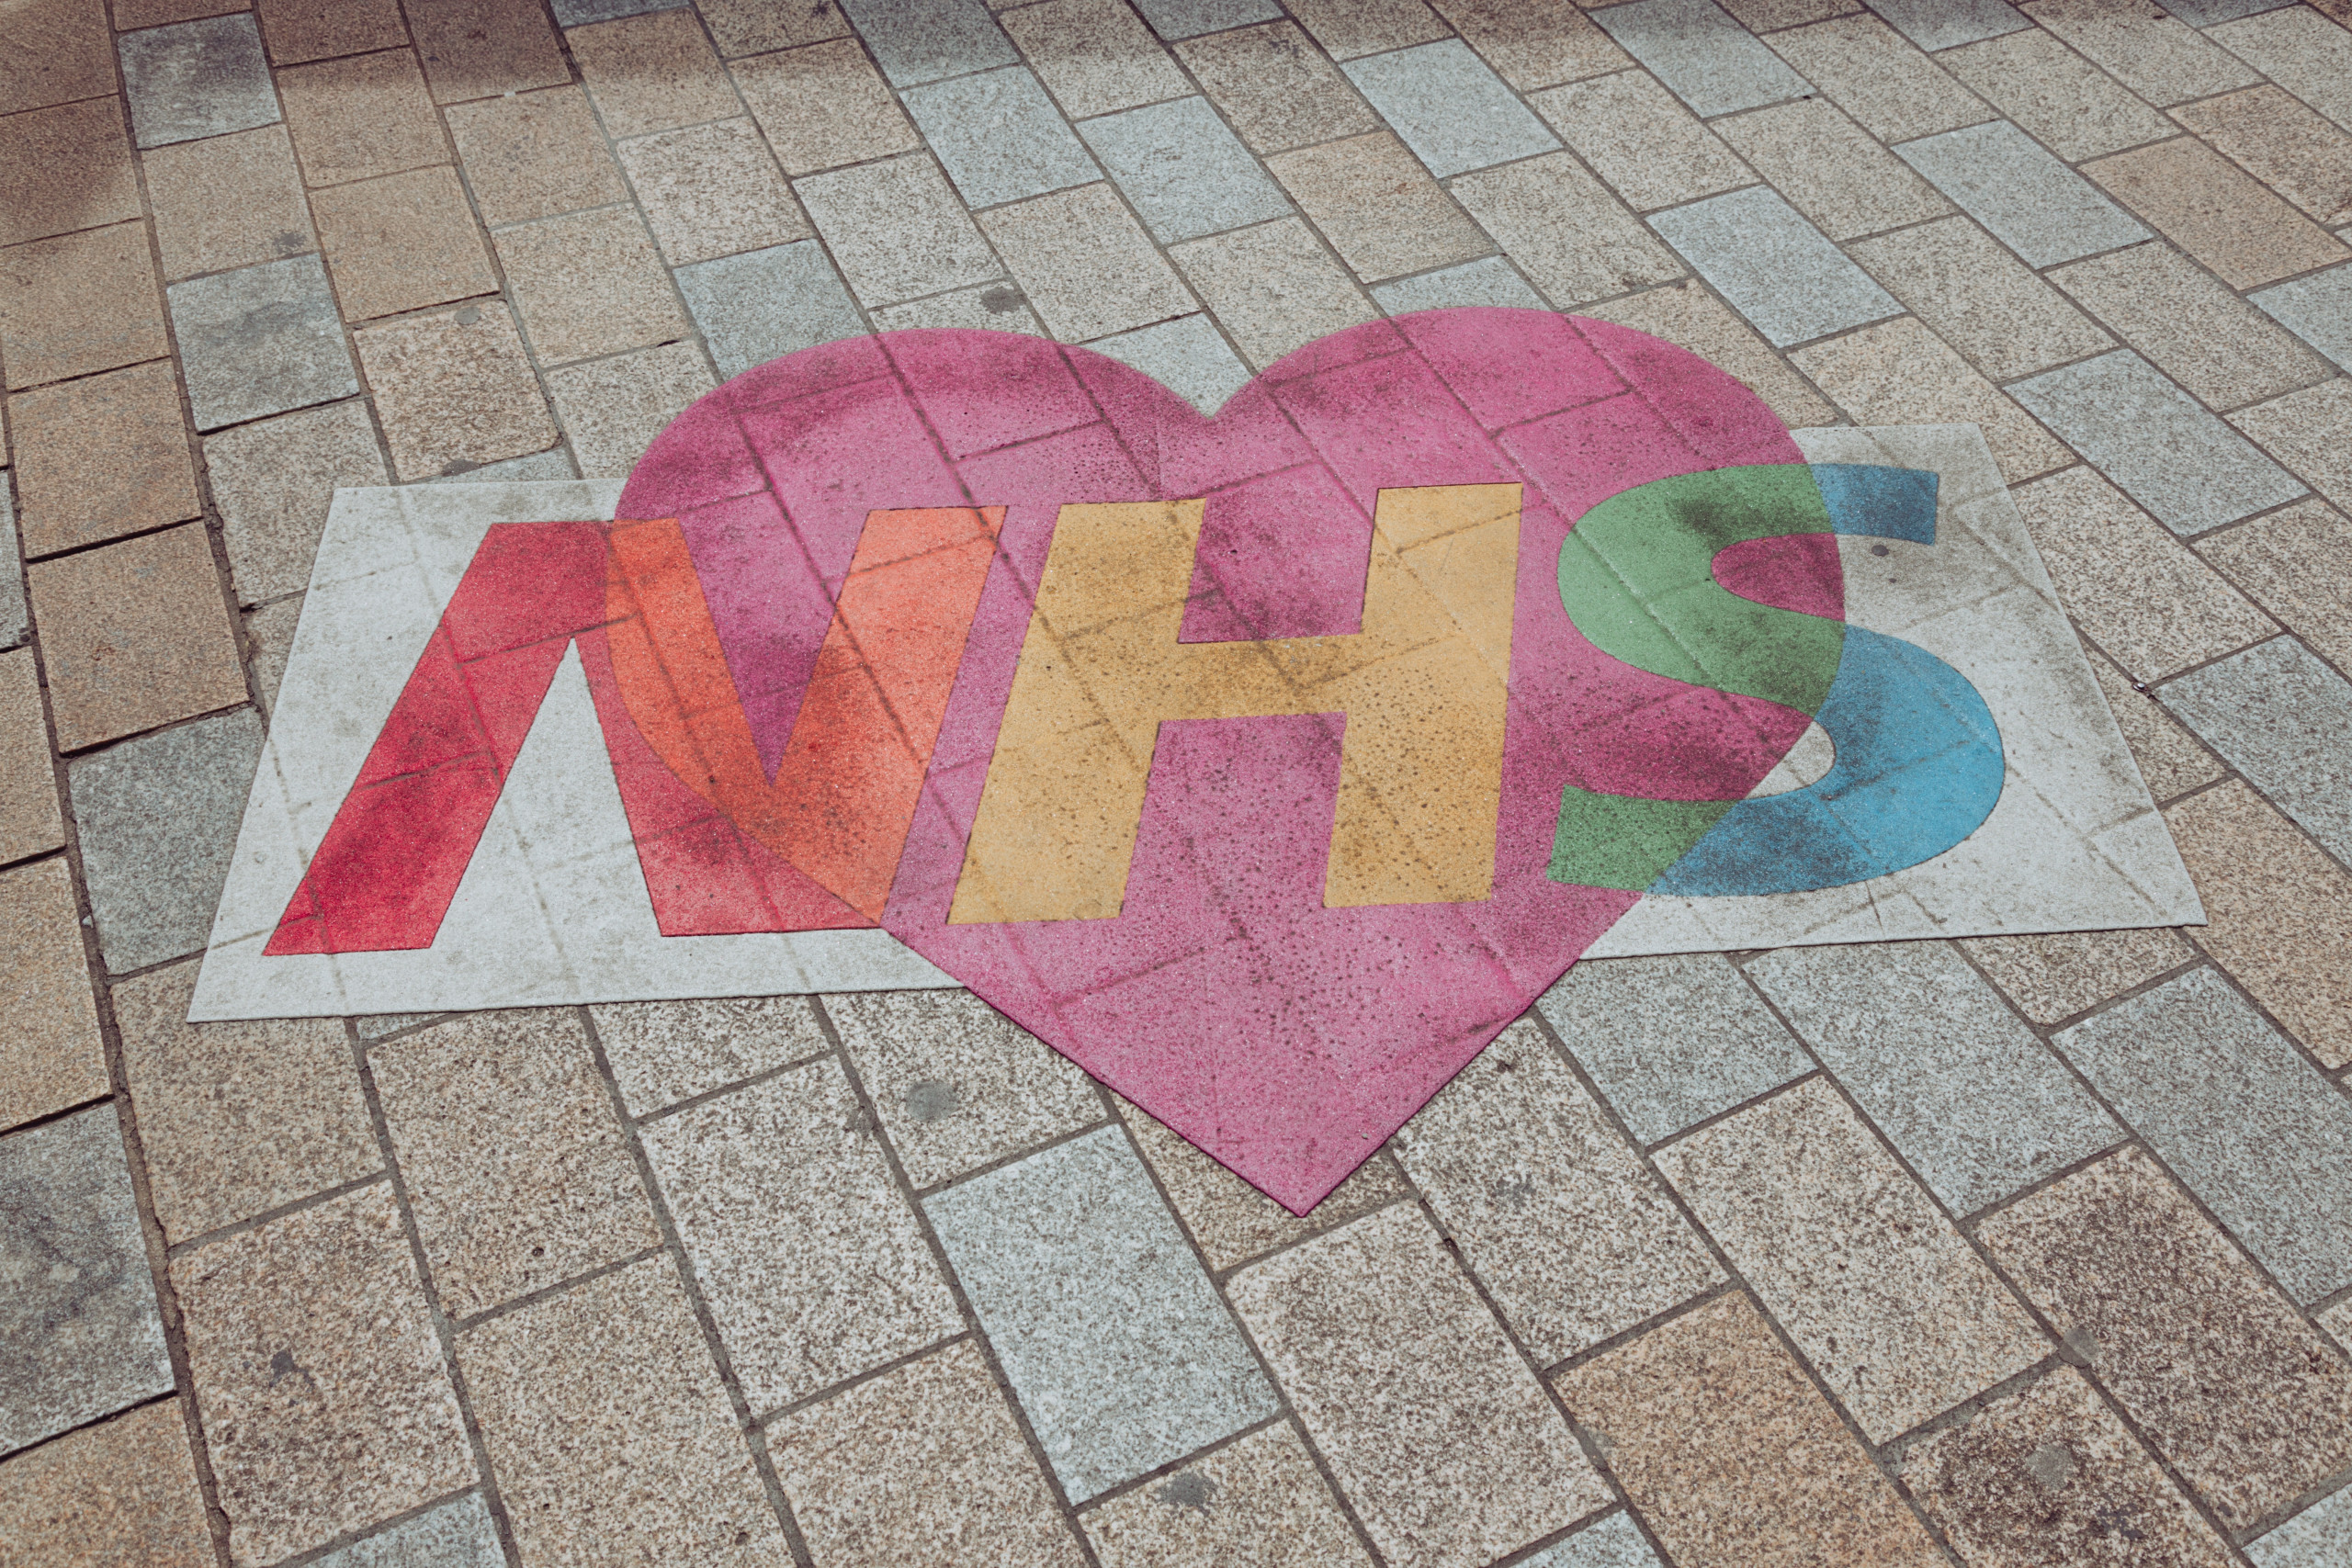 NHS sign with a heart around it drawn on a brick drive way.